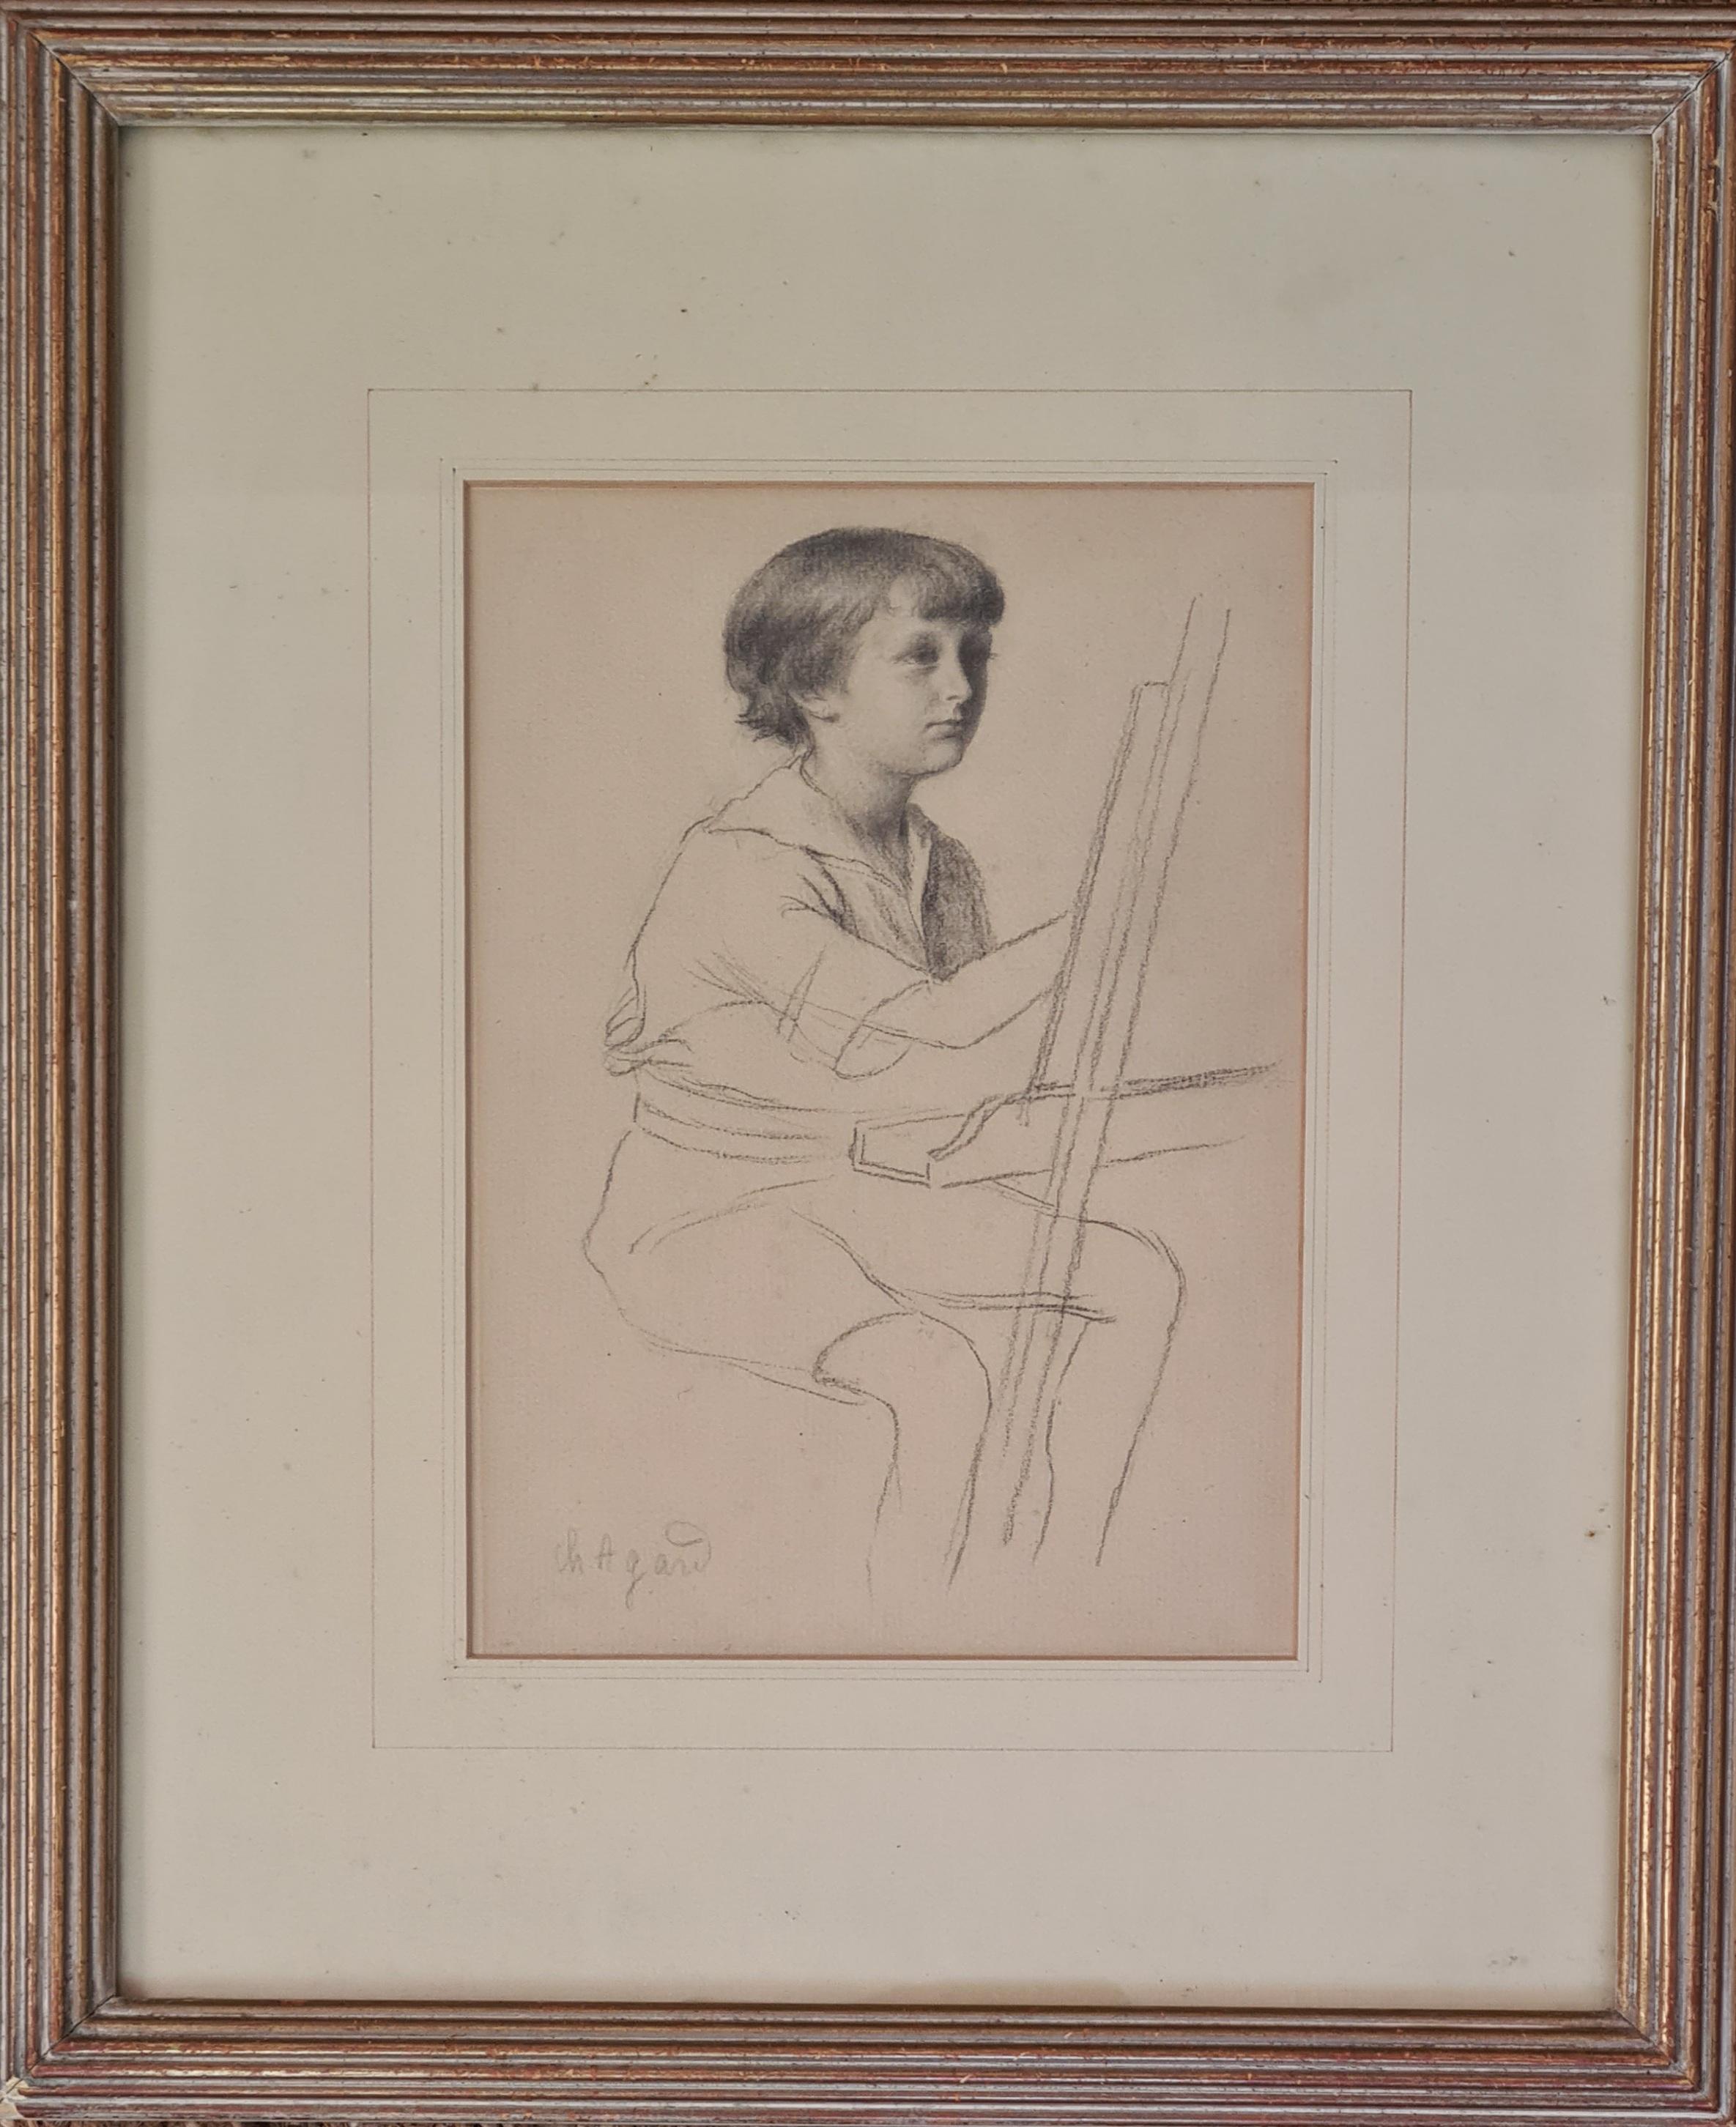 Pencil study portrait drawing of a child painting at an easel by French artist Charles-Jean Agard. The work is signed bottom left and presented in a carved wood and gilt frame with mount under glass.

A very charming pencil study of a child sitting